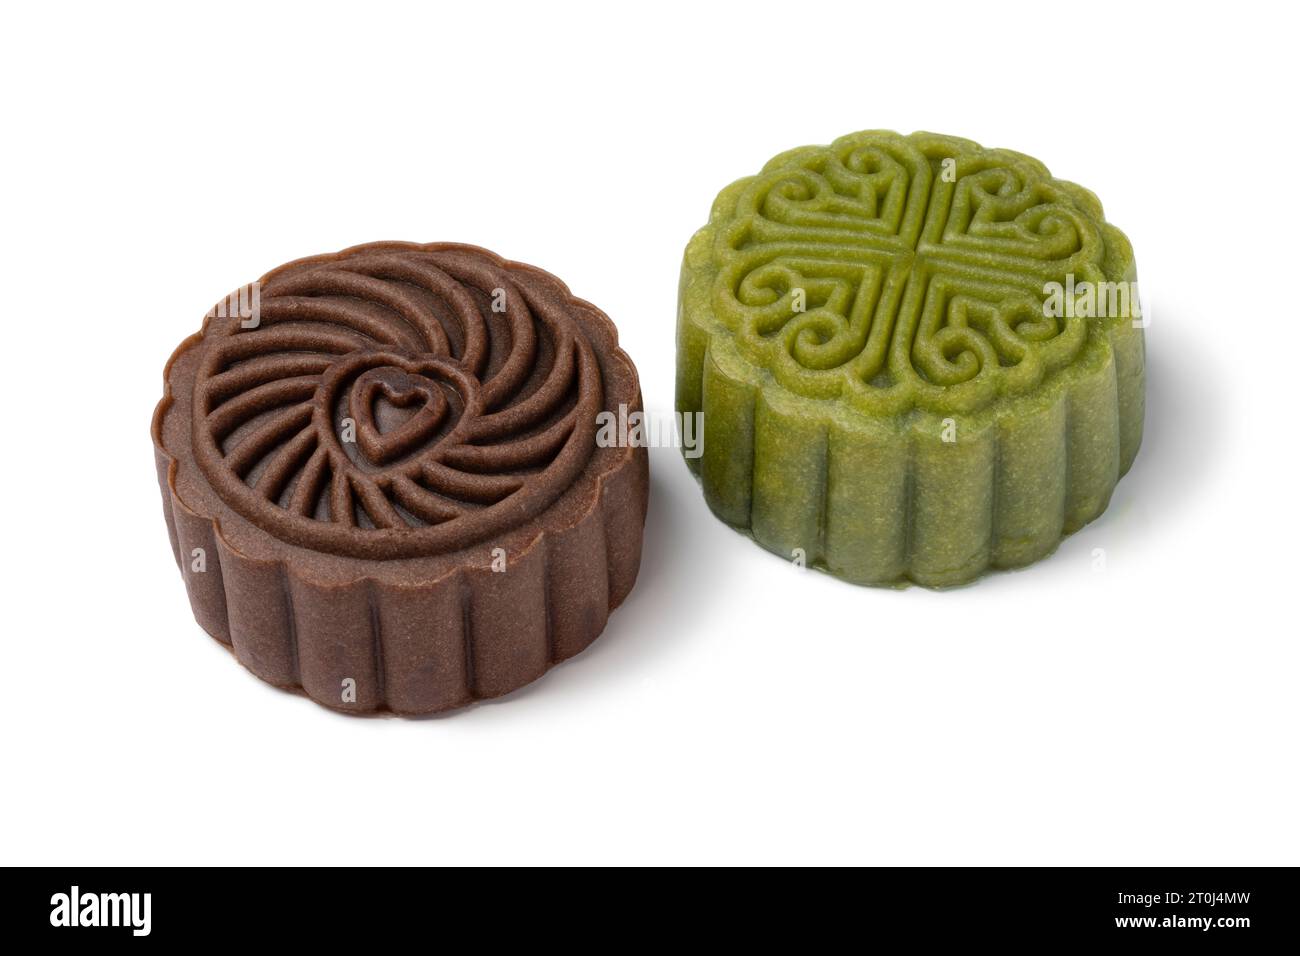 Green Snowskin and chocolate mooncakes, new variations of mooncake for Mid-Autumn Festival close up isolated on white background Stock Photo